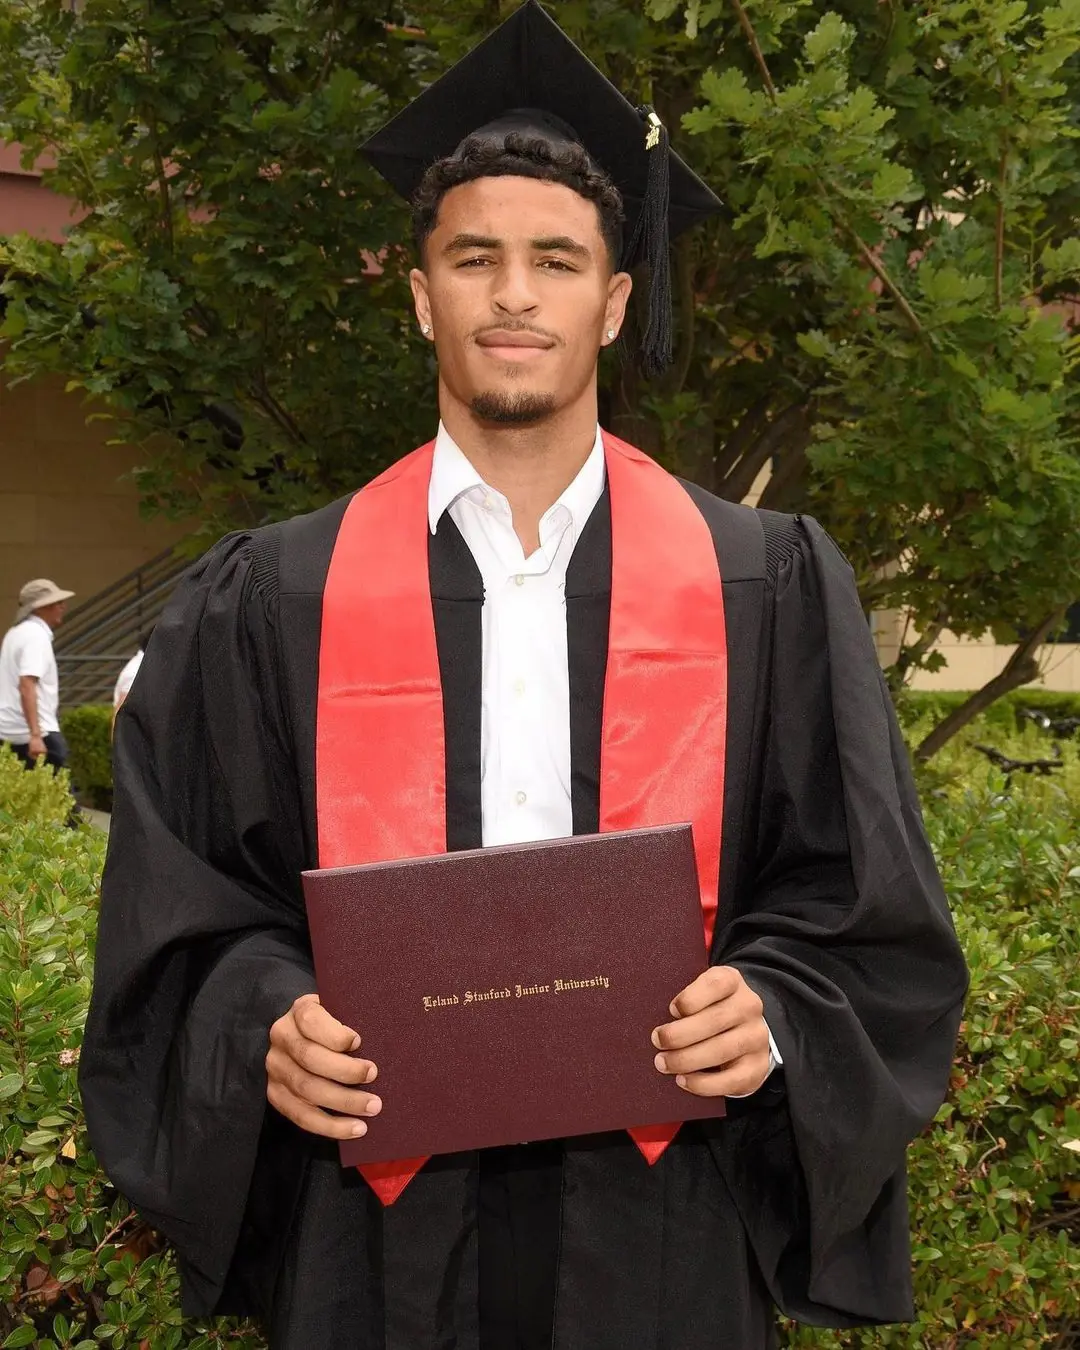 Wilson graduated from Stanford University with a Master's degree in June 2017.